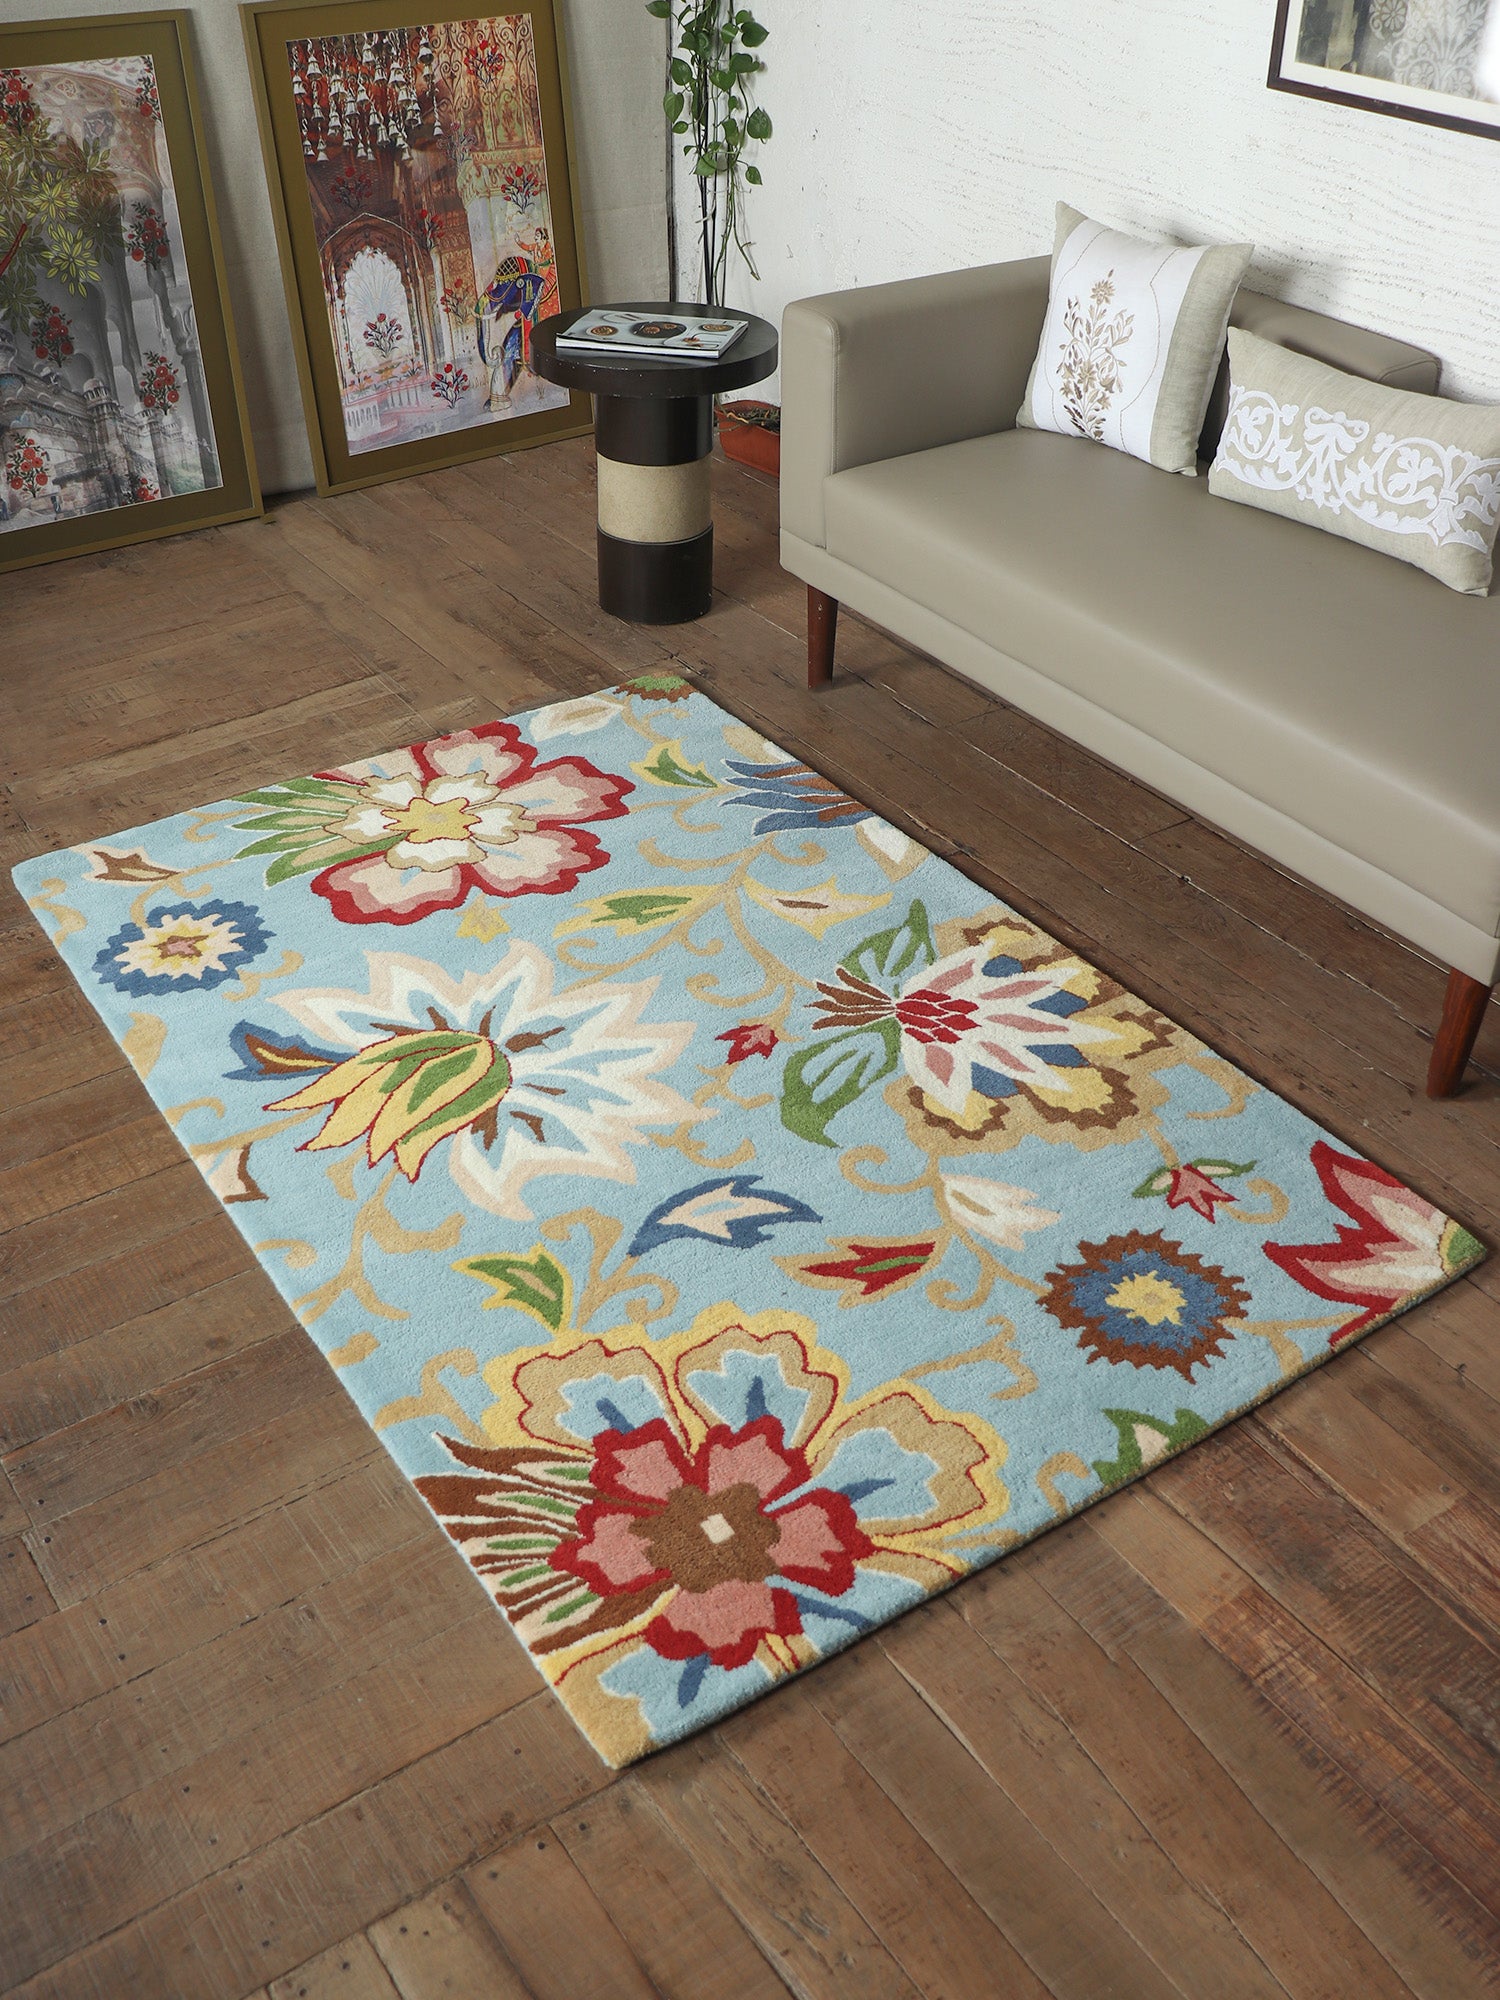 Hand Tufted 100% Wool | Decorative Floral Non Slip Vintage Rug Premium Exclusive Carpet for Living Room, Bedroom, Office - (Multicolor, 4x6 Ft) 